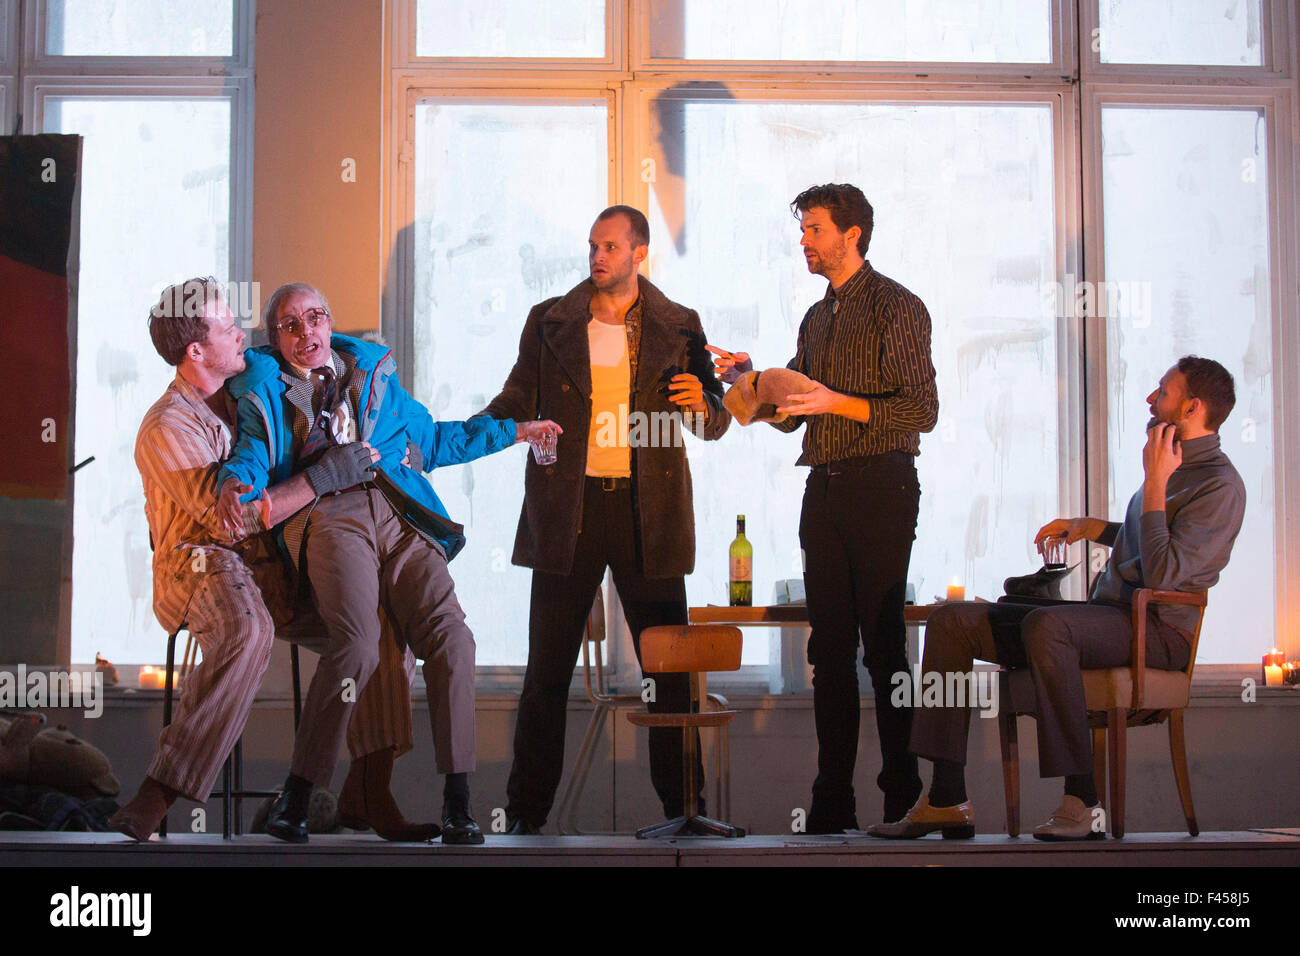 London, UK. 14/10/2015. L-R: Duncan Rock as Marcello, Simon Butteriss as Benoit, Nicholas Masters as Colline, Zach Borichevsky as Rodolfo and Ashley Riches as Schaunard. Dress rehearsal of the Giacomo Puccini opera La Boheme directed by Benedict Andrews at the London Coliseum. Conducted by Xian Zhang. Cast: Corinne Winters as Mimi, Zach Borichevsky as Rodolfo, Duncan Rock as Marcello and Rhian Lois as Musetta. Stock Photo